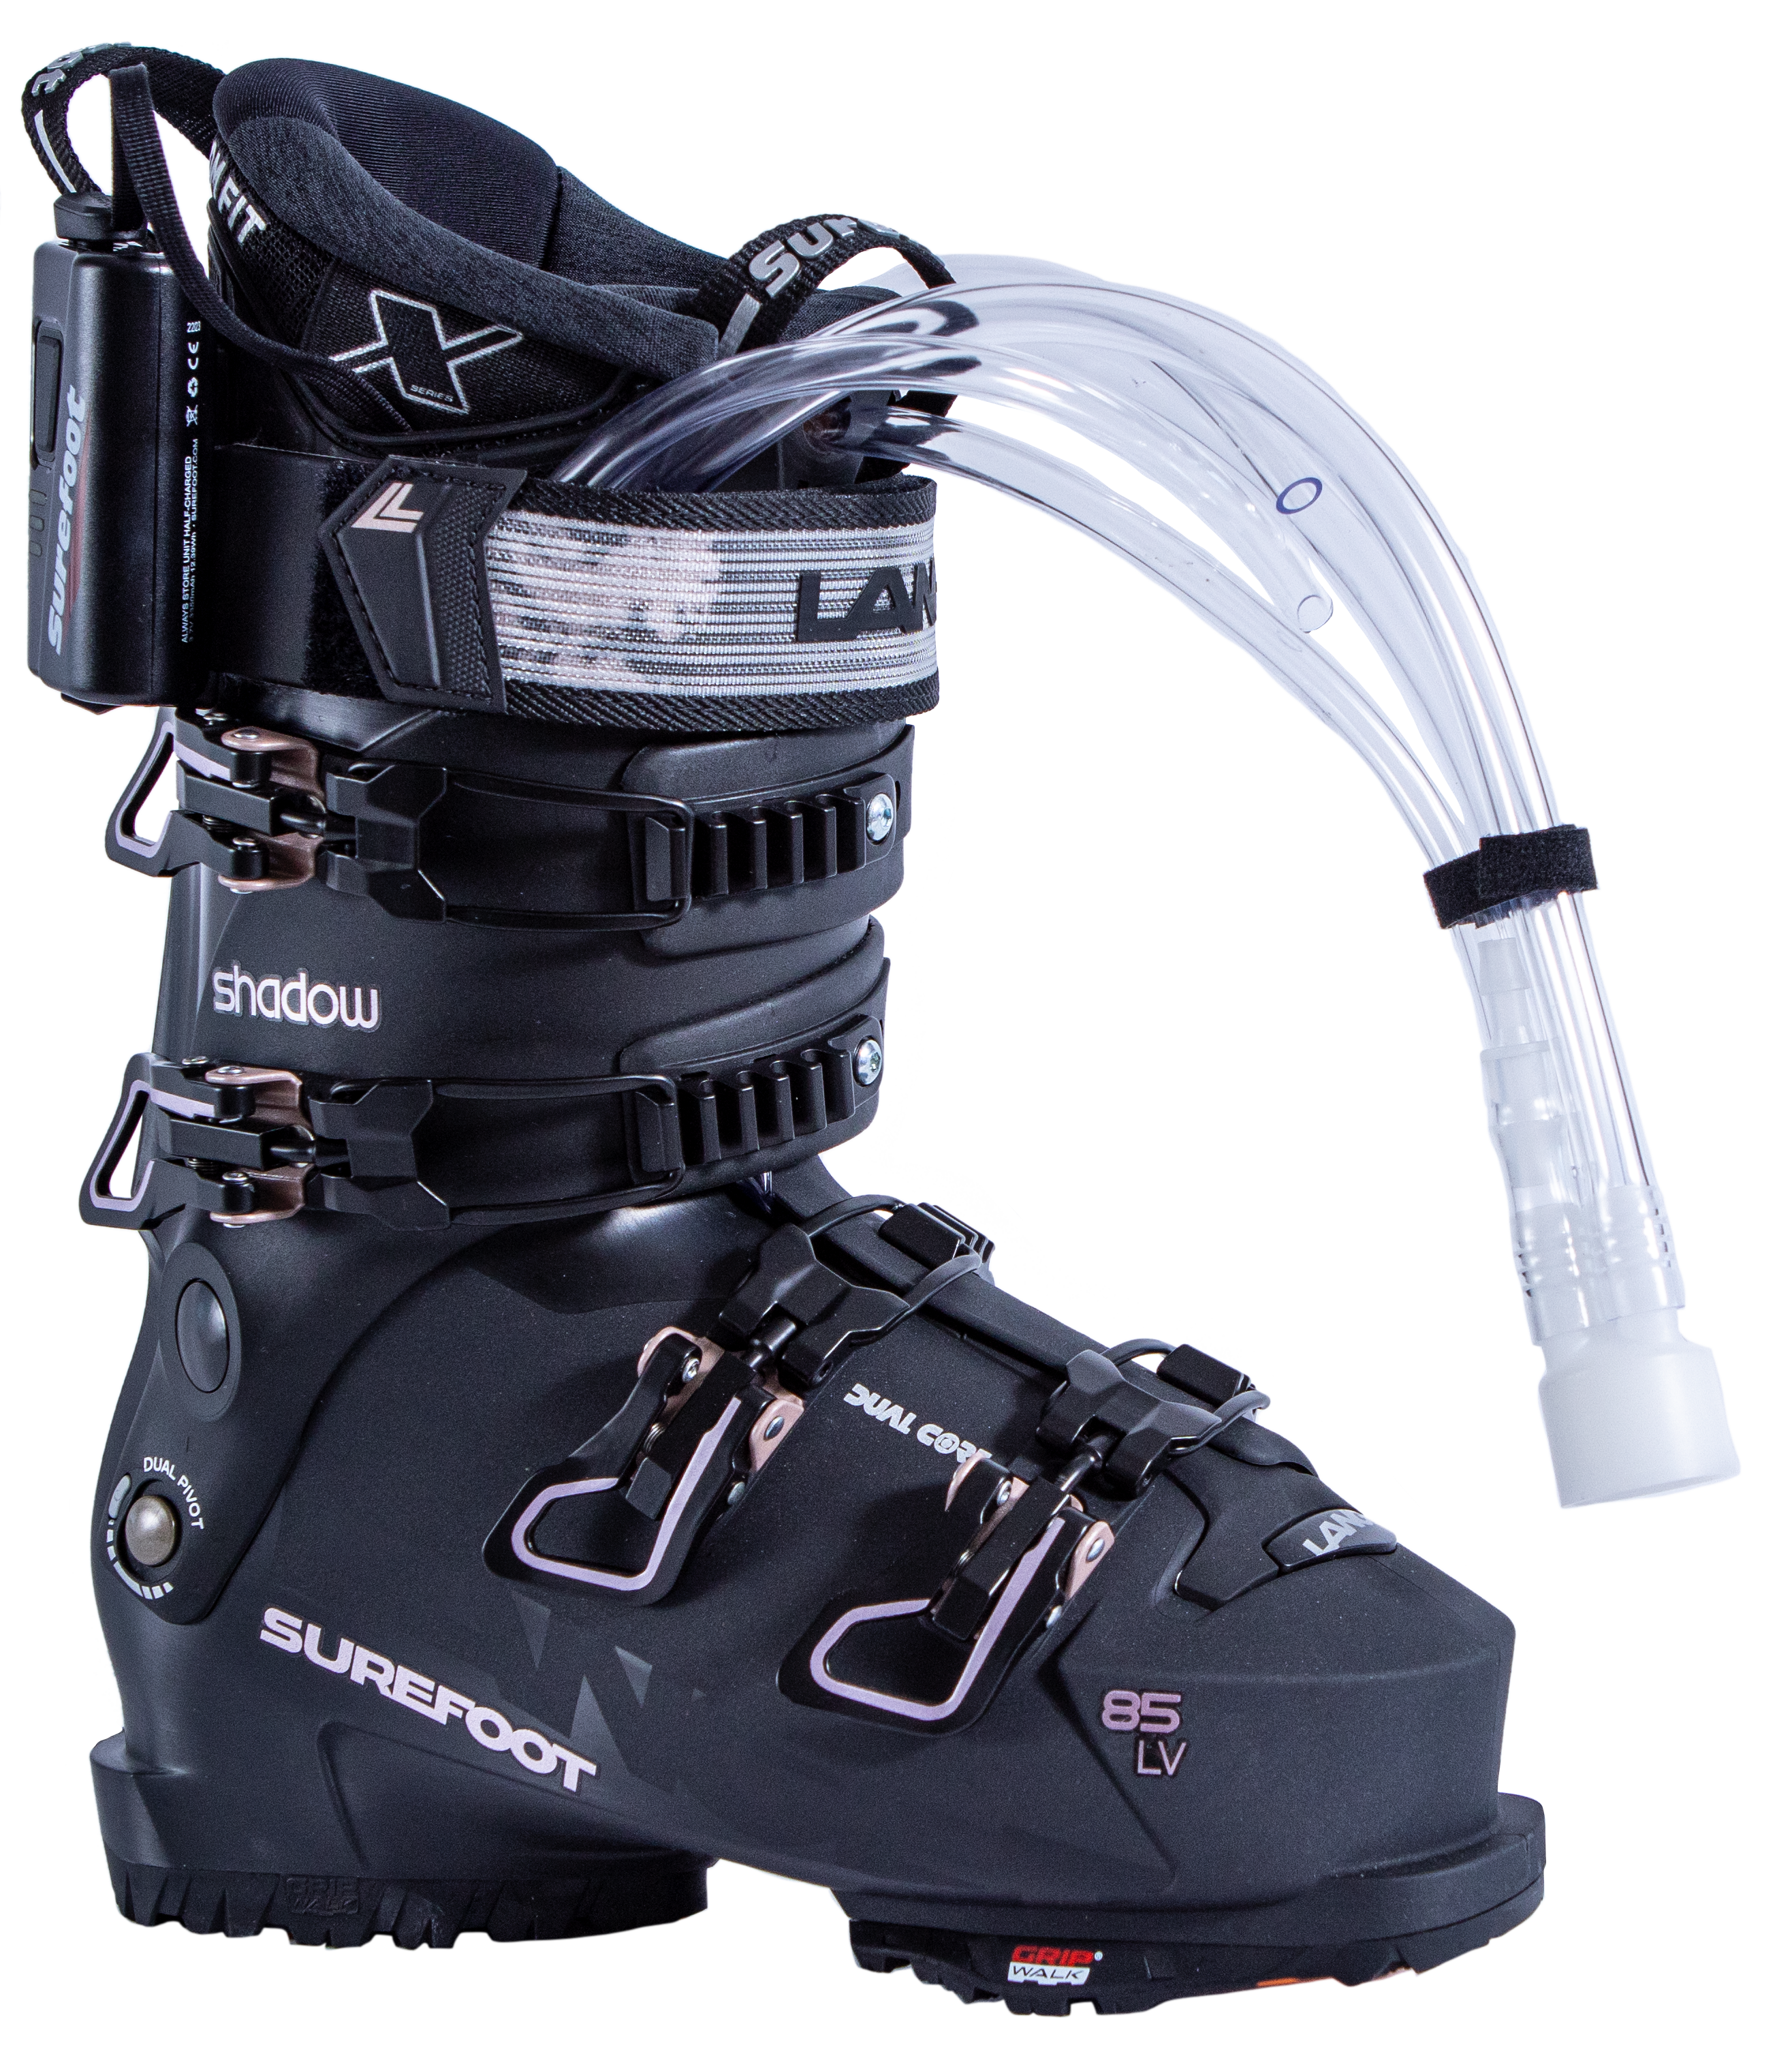 Surefoot Lange Shadow 85 LV matte black ski boot shell with light pink accents on buckles and Lange logo in black on power strap, Surefoot logo in light pink. Plastic tubes coming out for Surefoot memory foam injection into shell lining. Winterheat ski boot heater attached to outside edge.